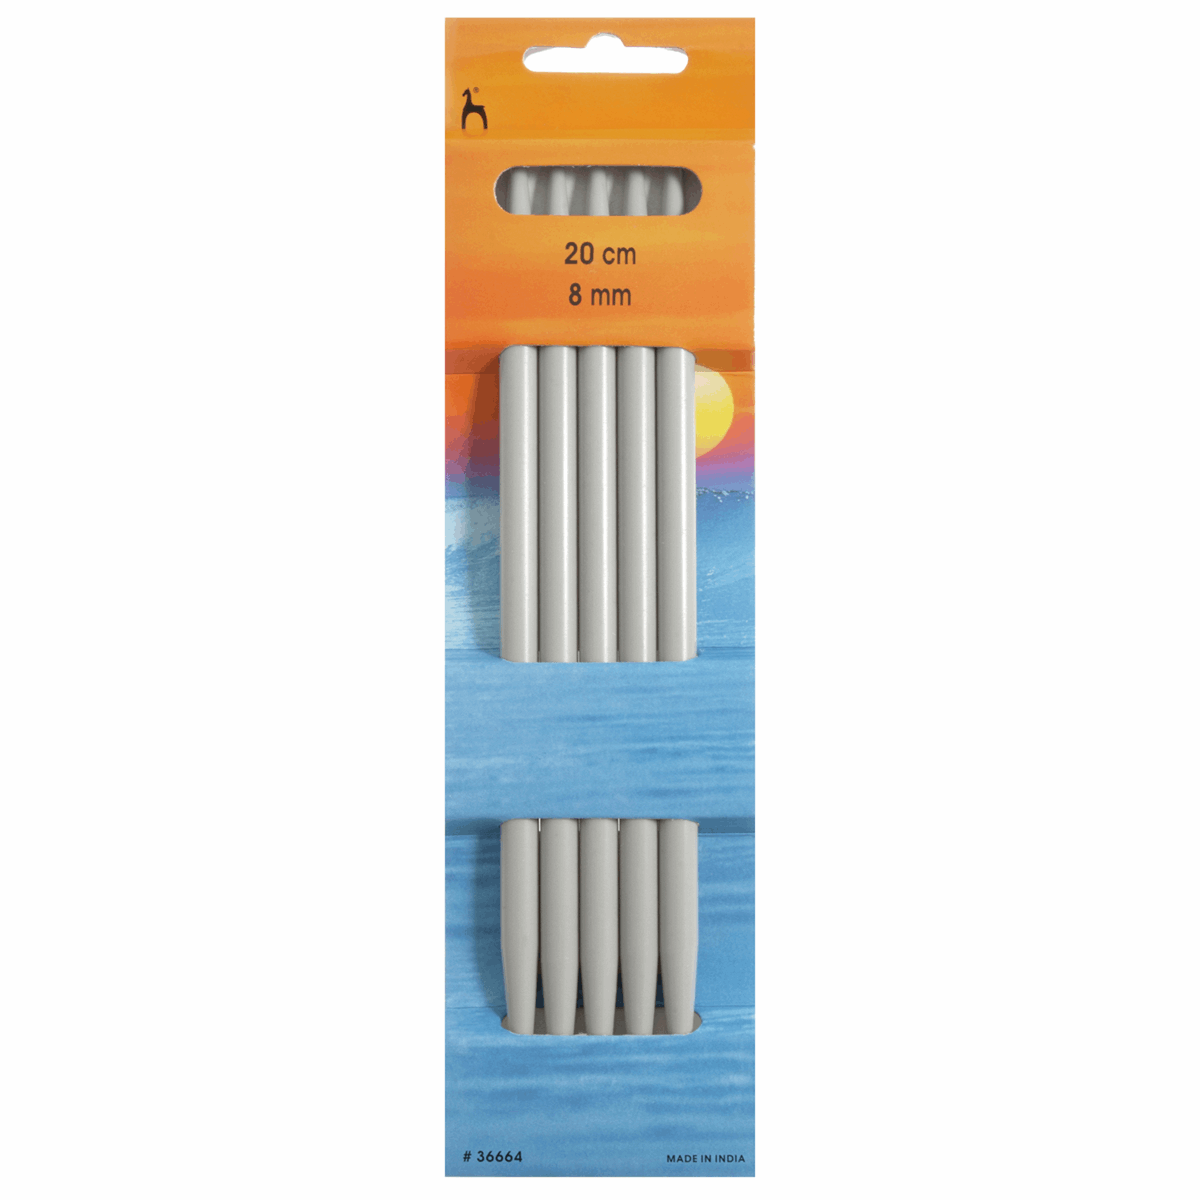 PONY Double-Ended Knitting Pins - 20cm x 8.00mm (Set of 5)